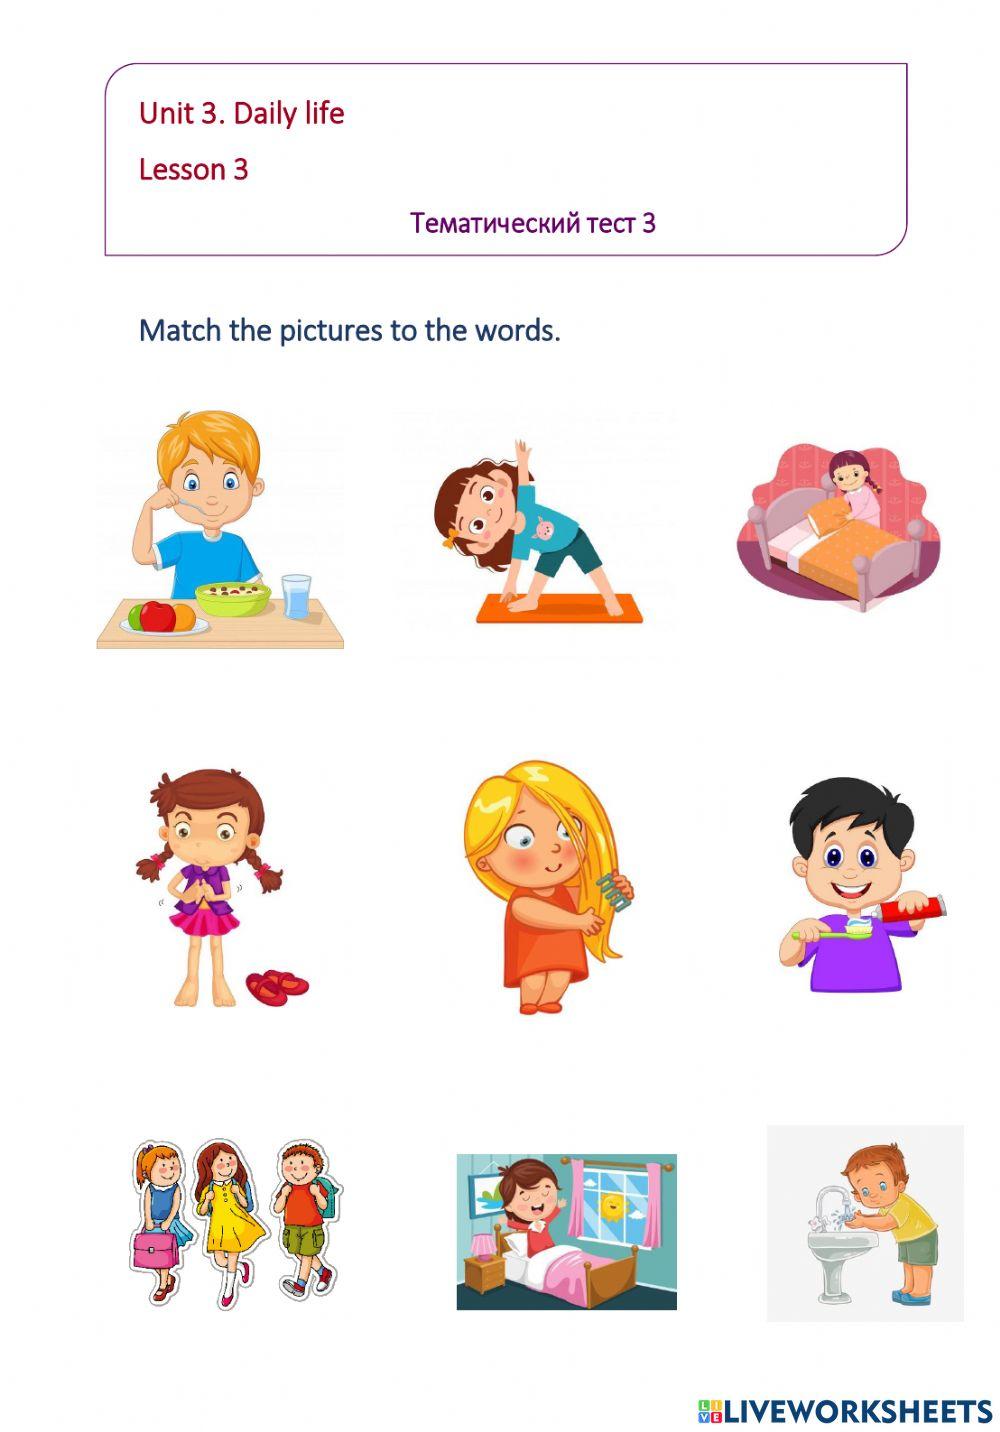 English-4-Unit 3-Lesson 3 Тематический тест 3 «Daily life». Match the pictures to the words